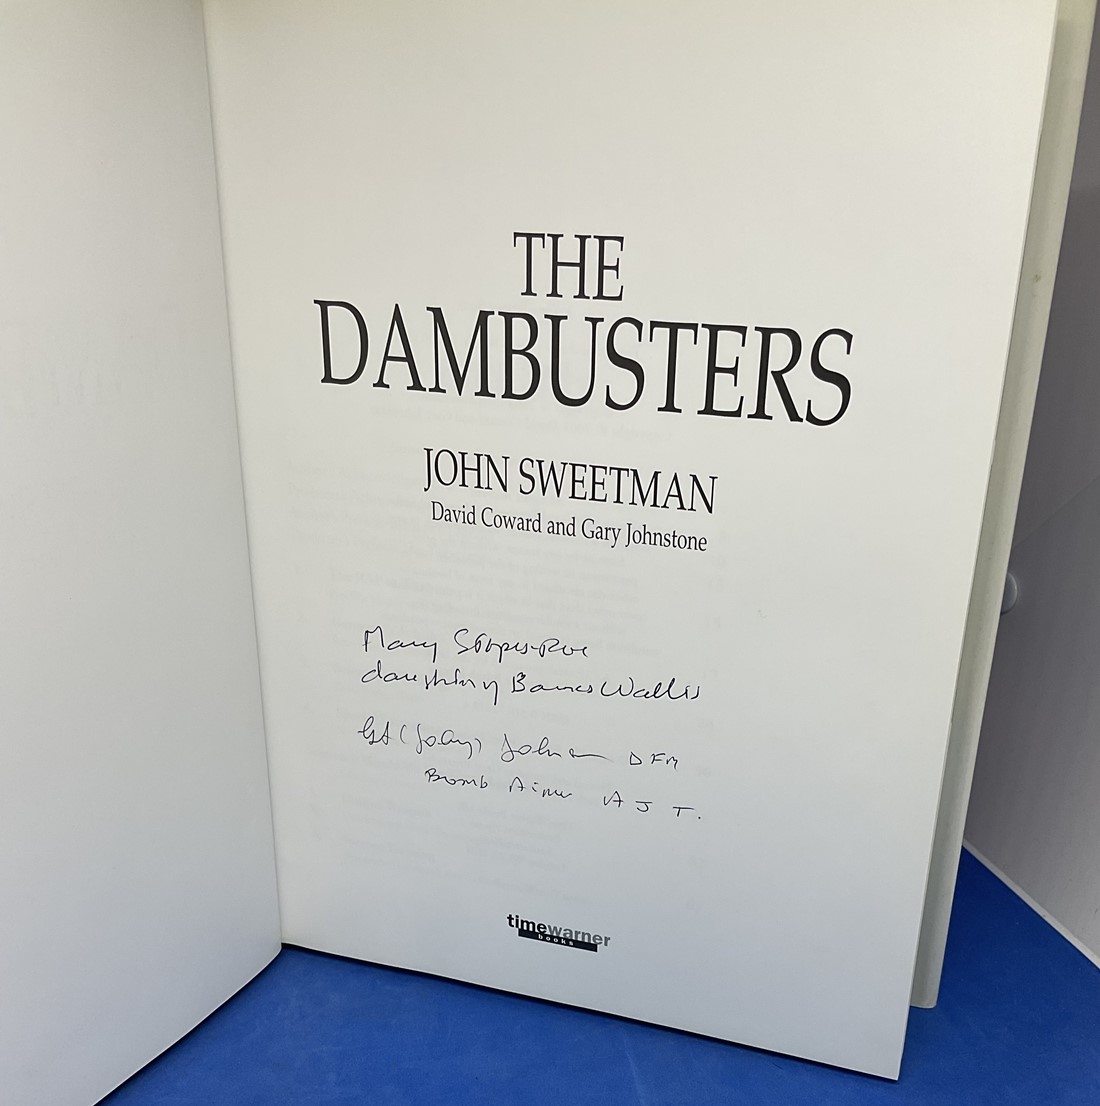 WW2 2 Signed The Dambusters 1st Ed Hardback Book by John Sweetman. Signed by Mary Stopes-Roe and Geo - Image 2 of 2